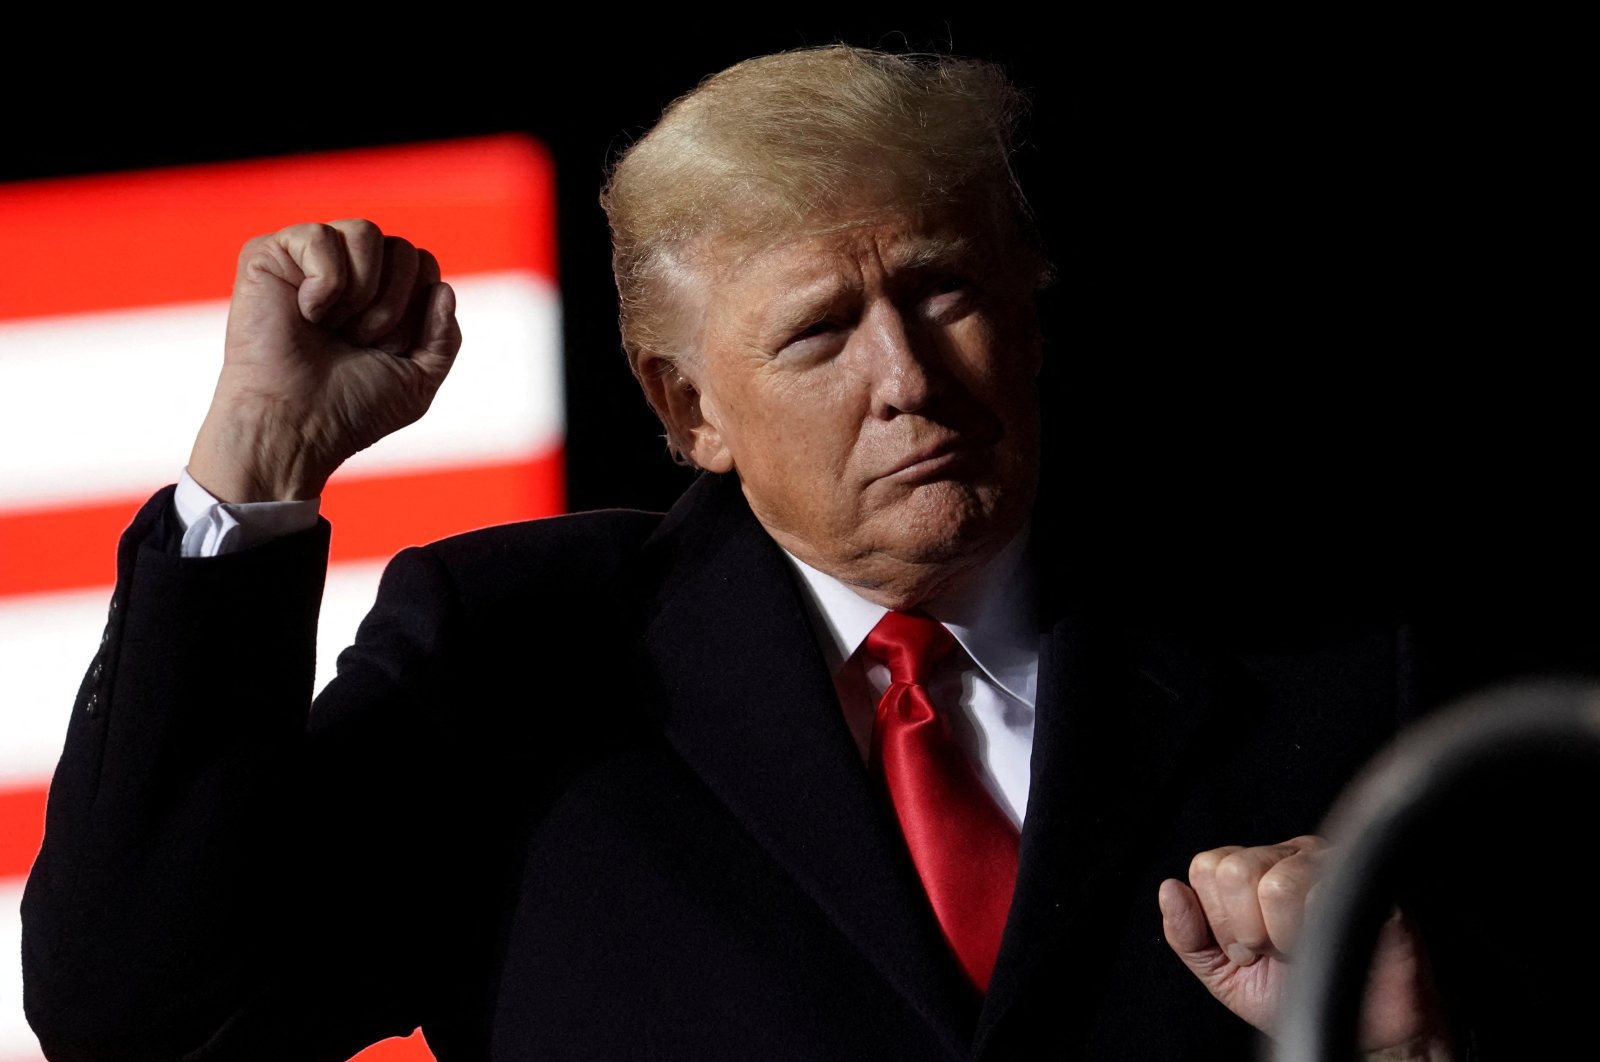 Former U.S. President Donald Trump gestures as he speaks during a rally in Conroe, Texas, U.S., Jan. 29, 2022. (Reuters Photo)